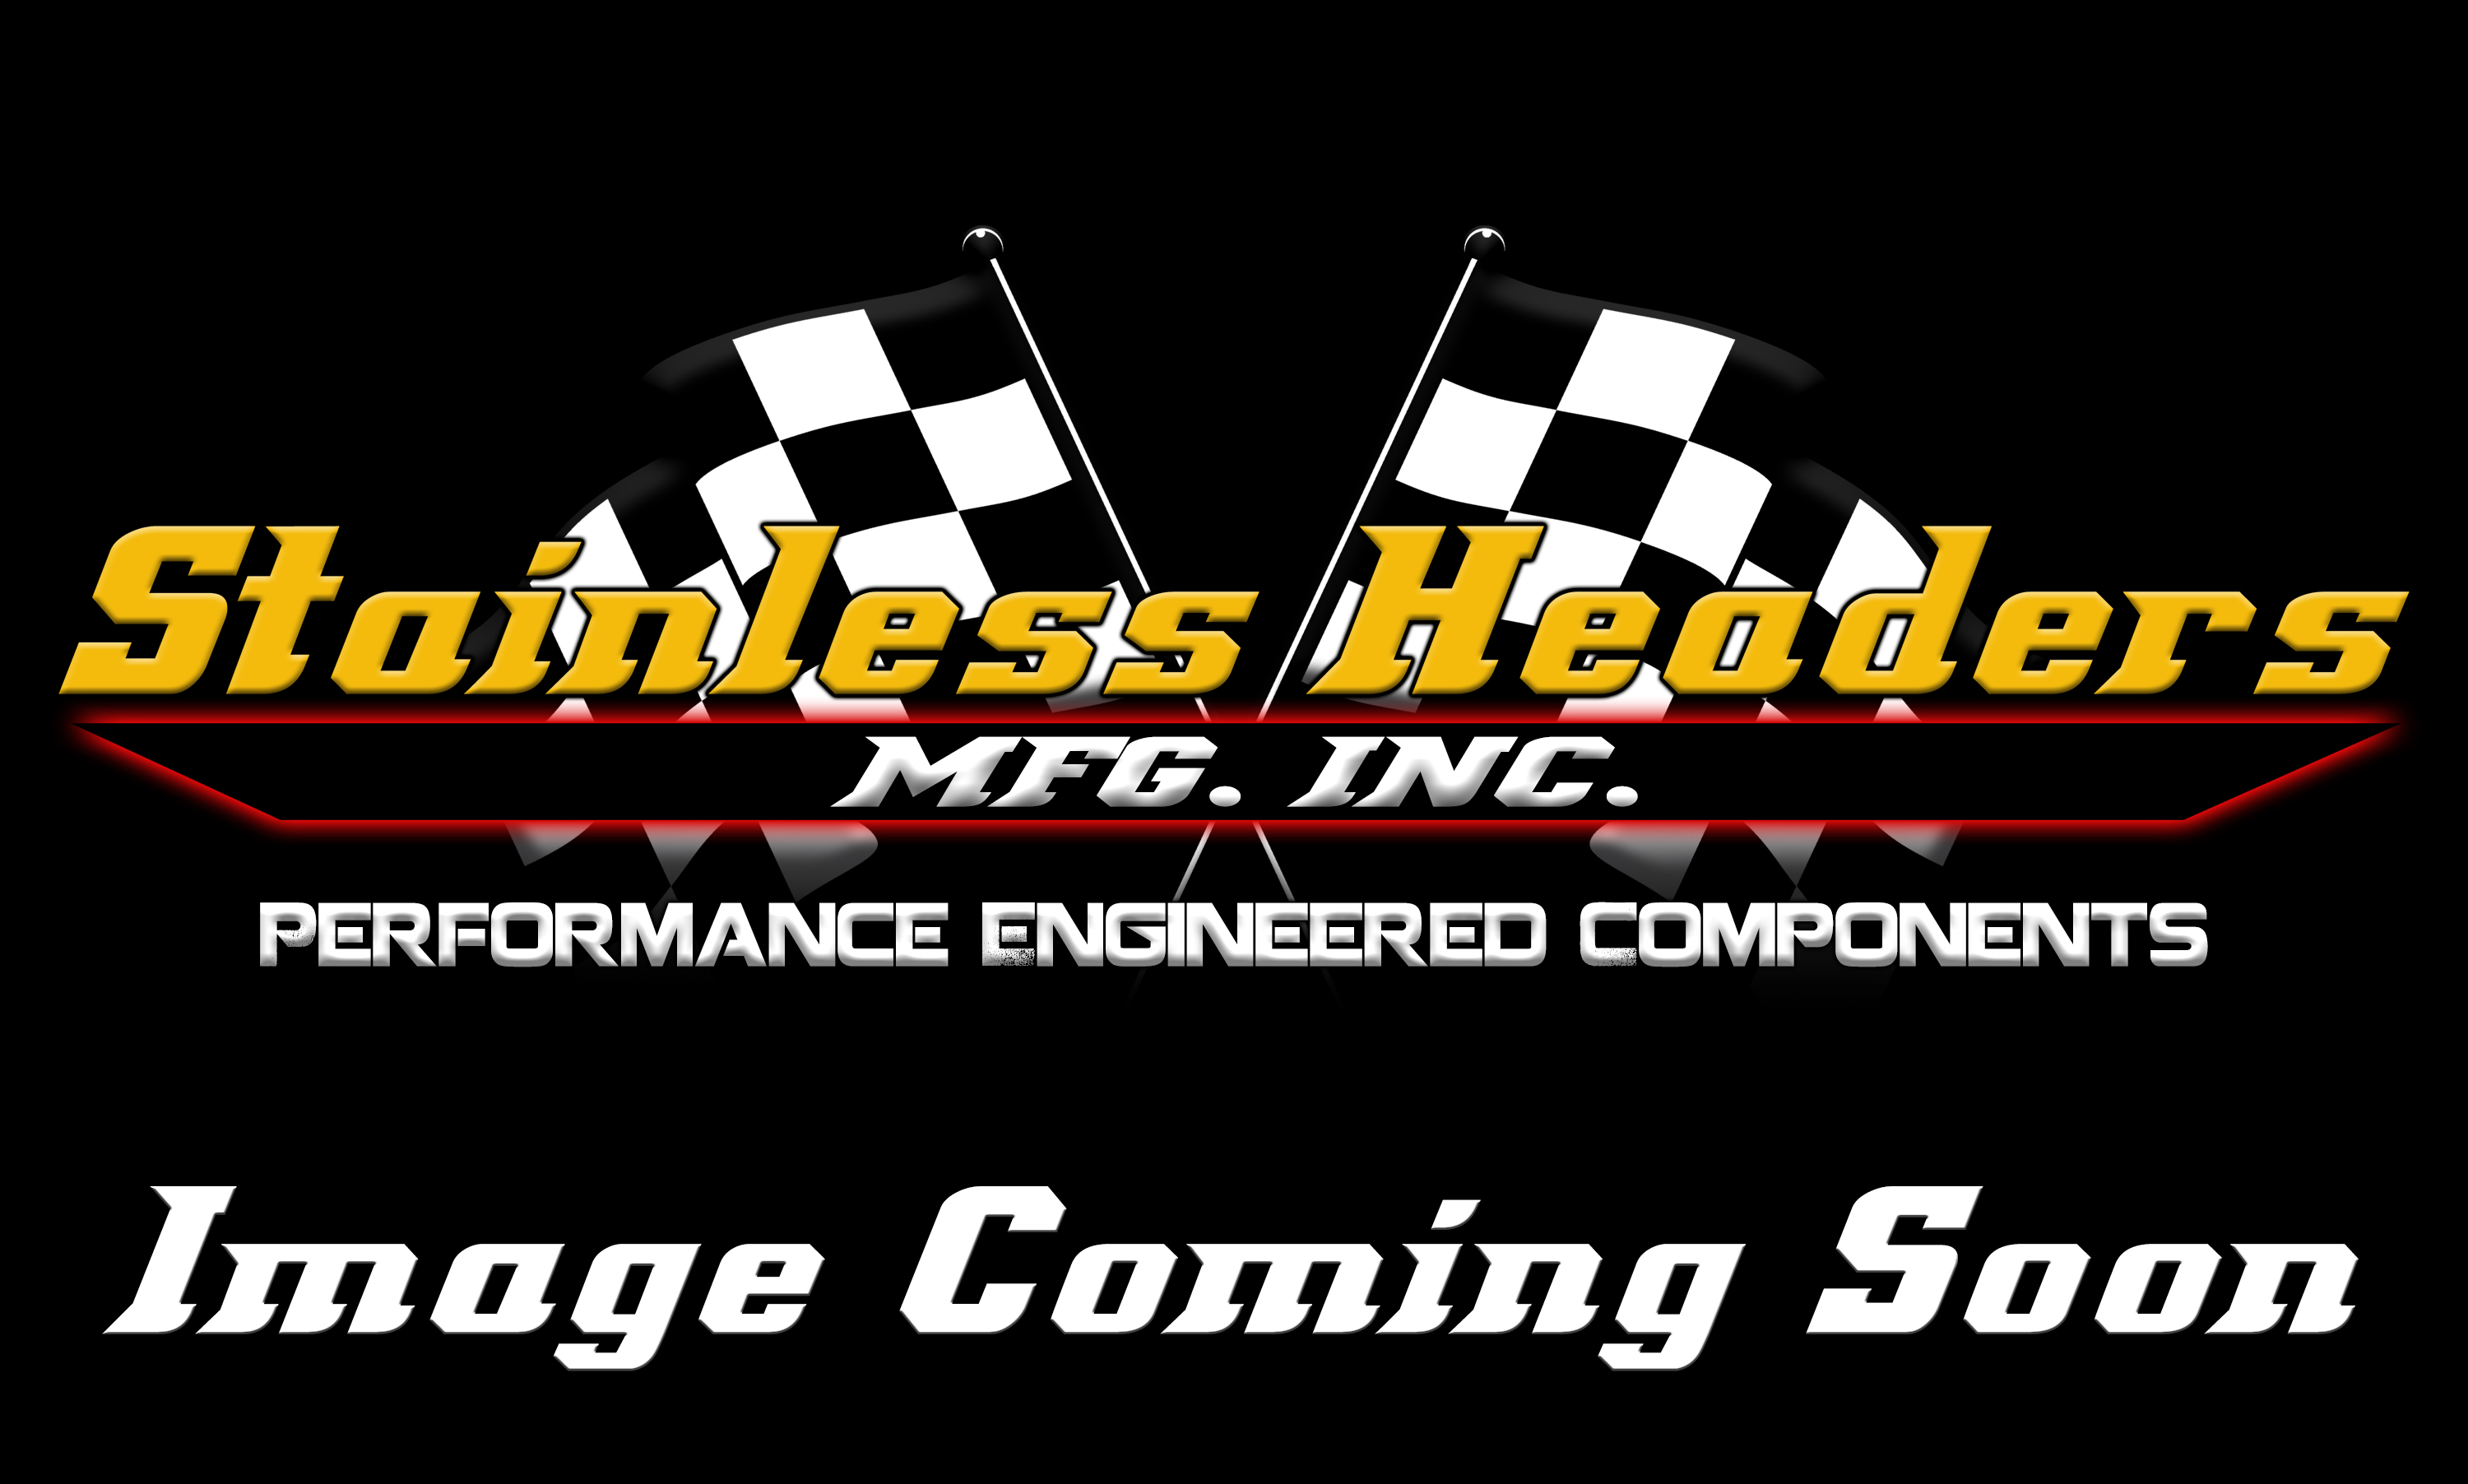 Stainless Headers - 2 3/8" Primary 2 into 1 Performance Merge Collector-16ga 321ss